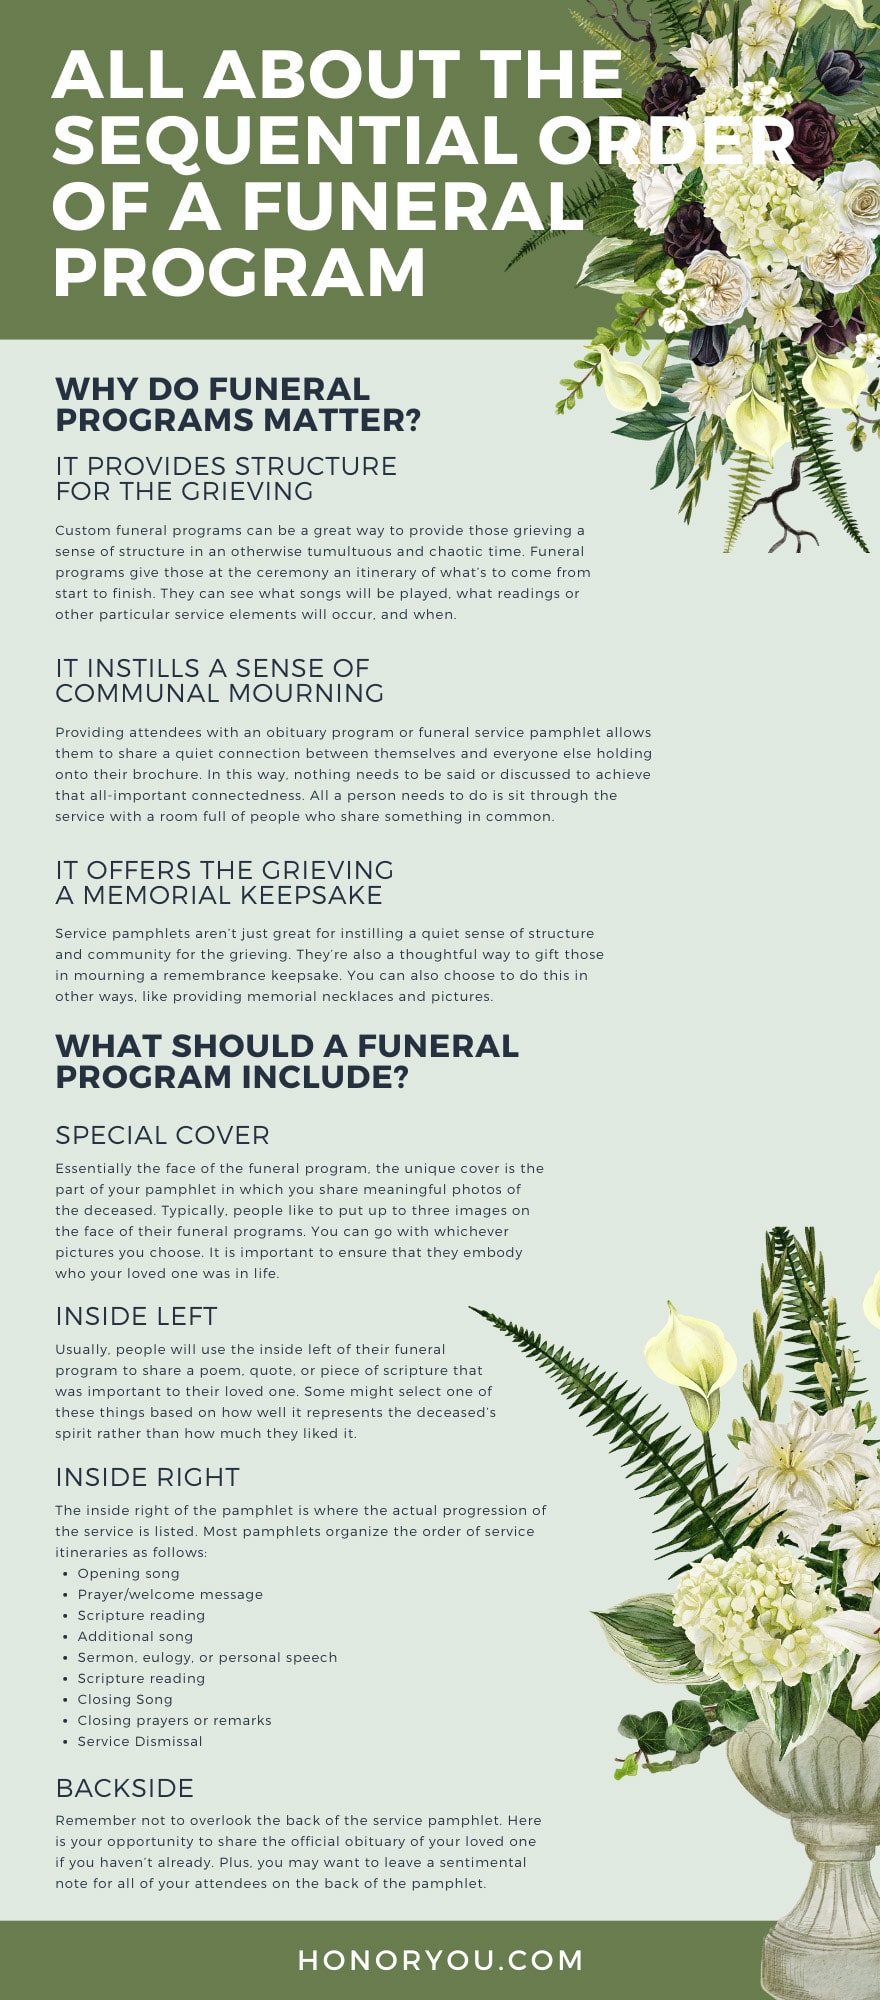 All About the Sequential Order of a Funeral Program